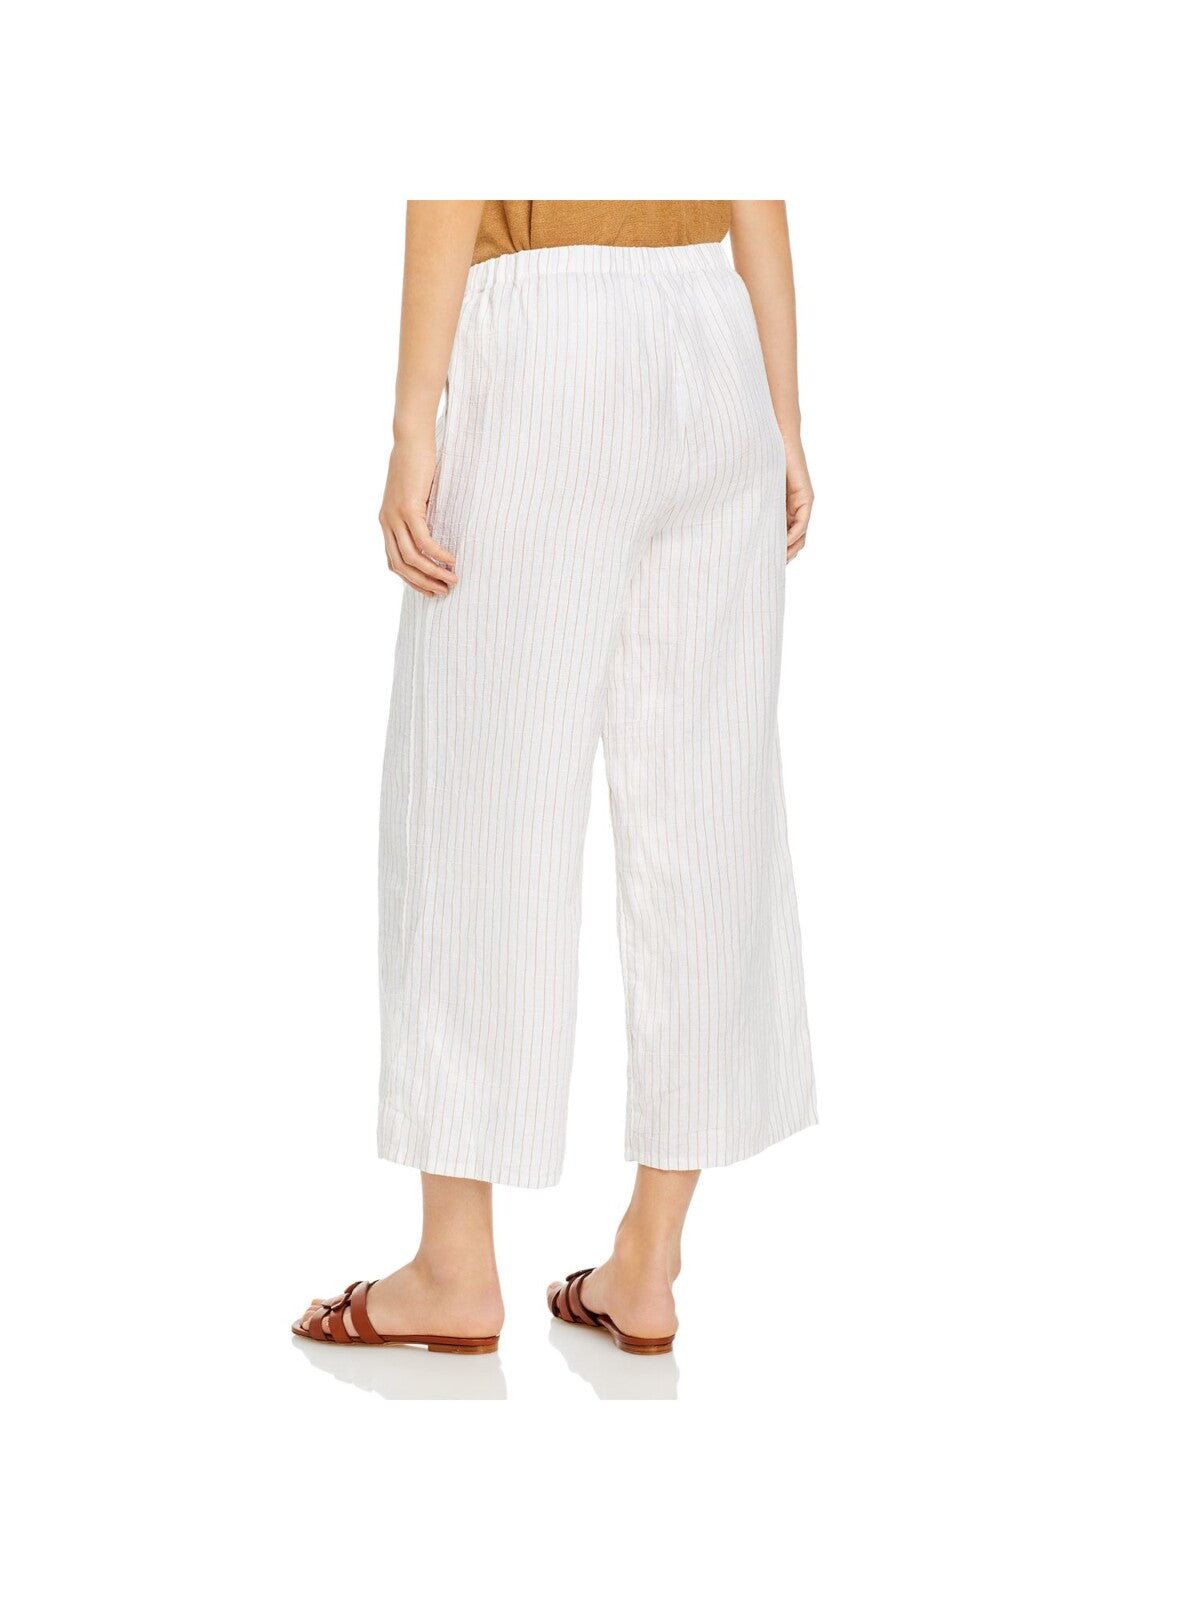 EILEEN FISHER Womens White Pocketed Elastic Waist Pull On Pinstripe Cropped Pants L